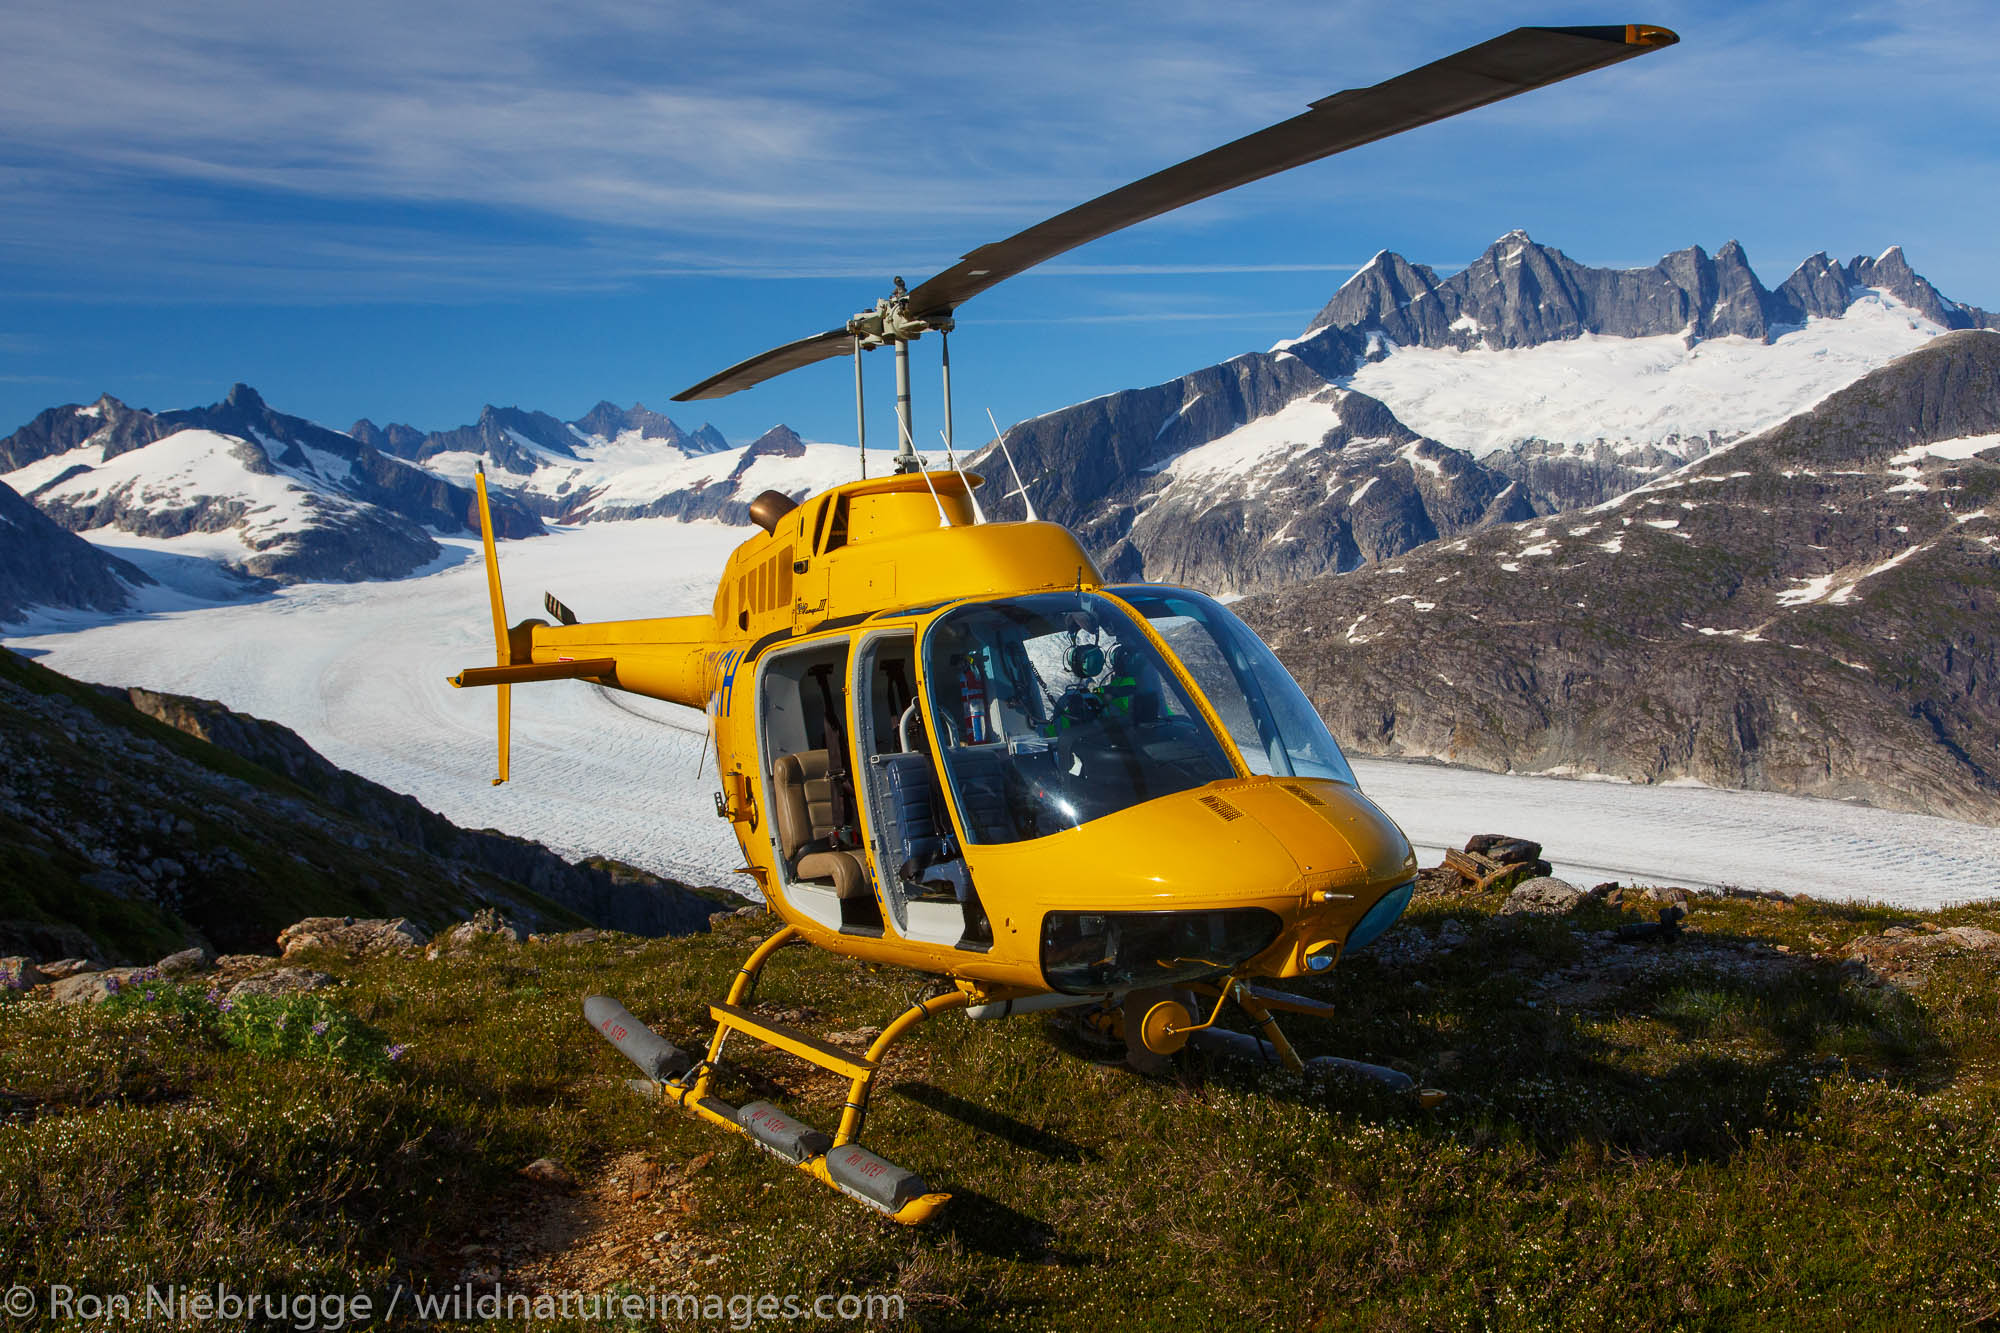 Helicopter on Mount Stroller White above the Mendenhall Glacier, Tongass National Forest, Alaska.